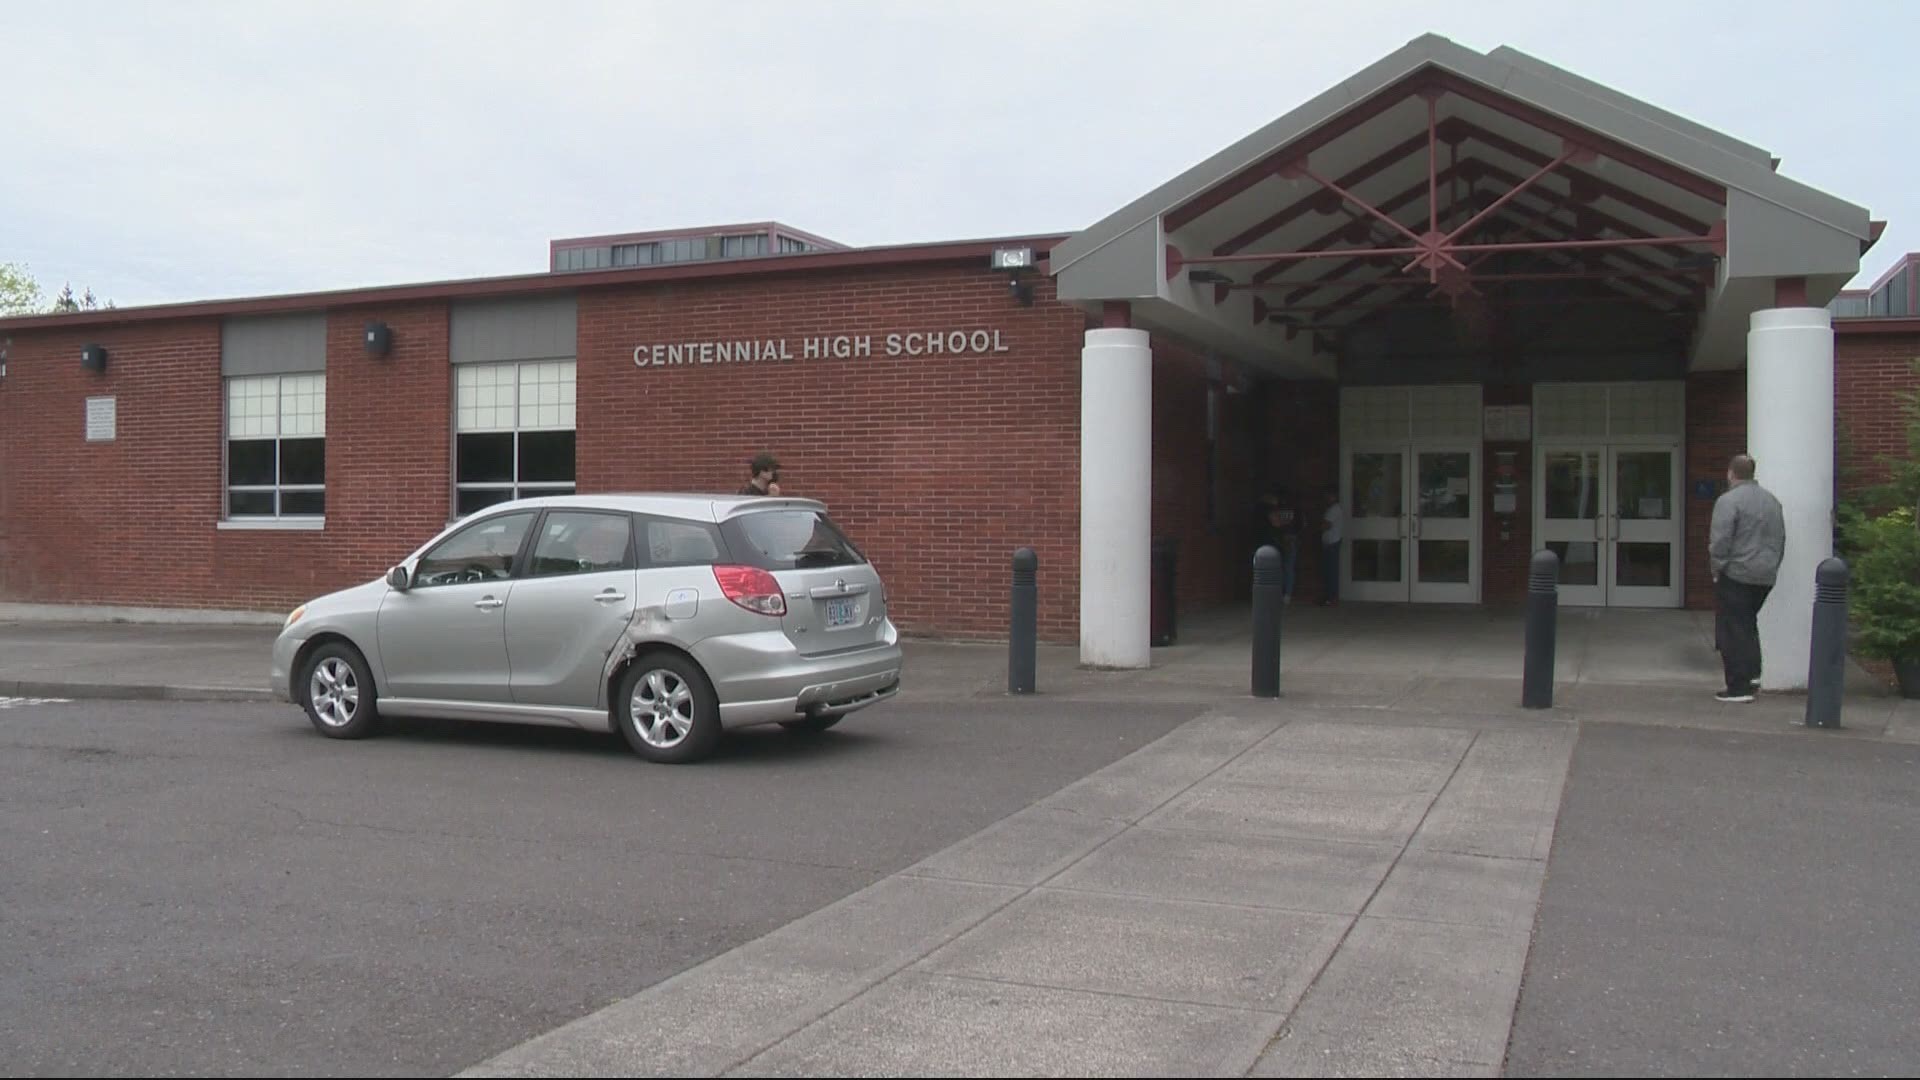 Students in the Centennial School District are still not able to access online classes after a large cyber-security breach a week ago.